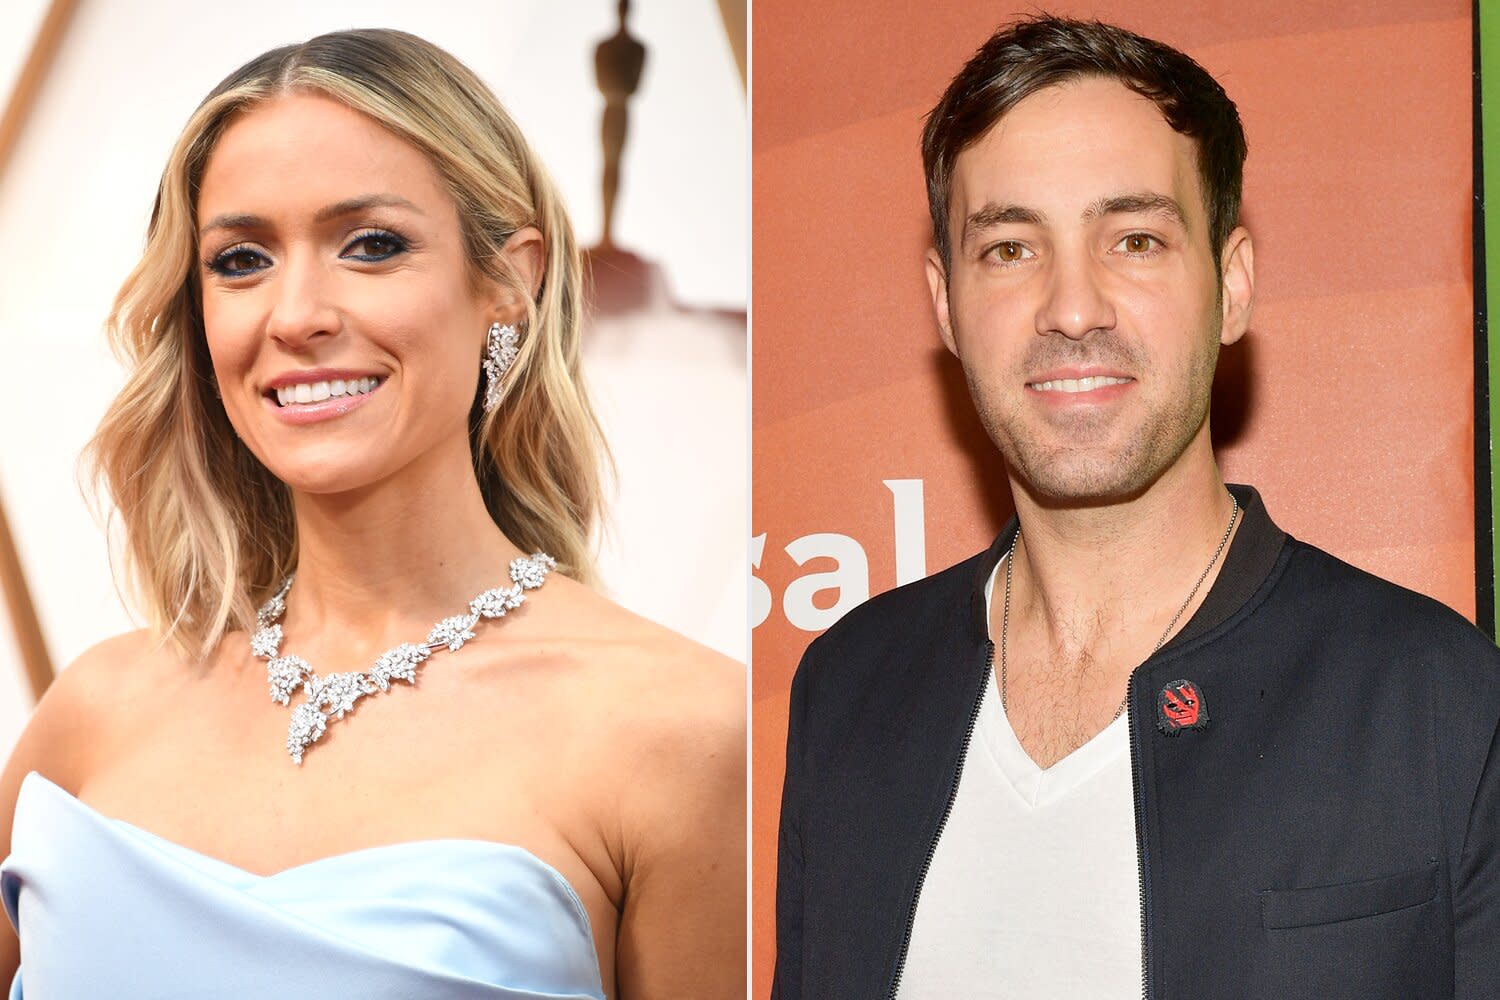 Kristin Cavallari and boyfriend Jeff Dye exchange ‘I Love You’ during the live chat on Instagram